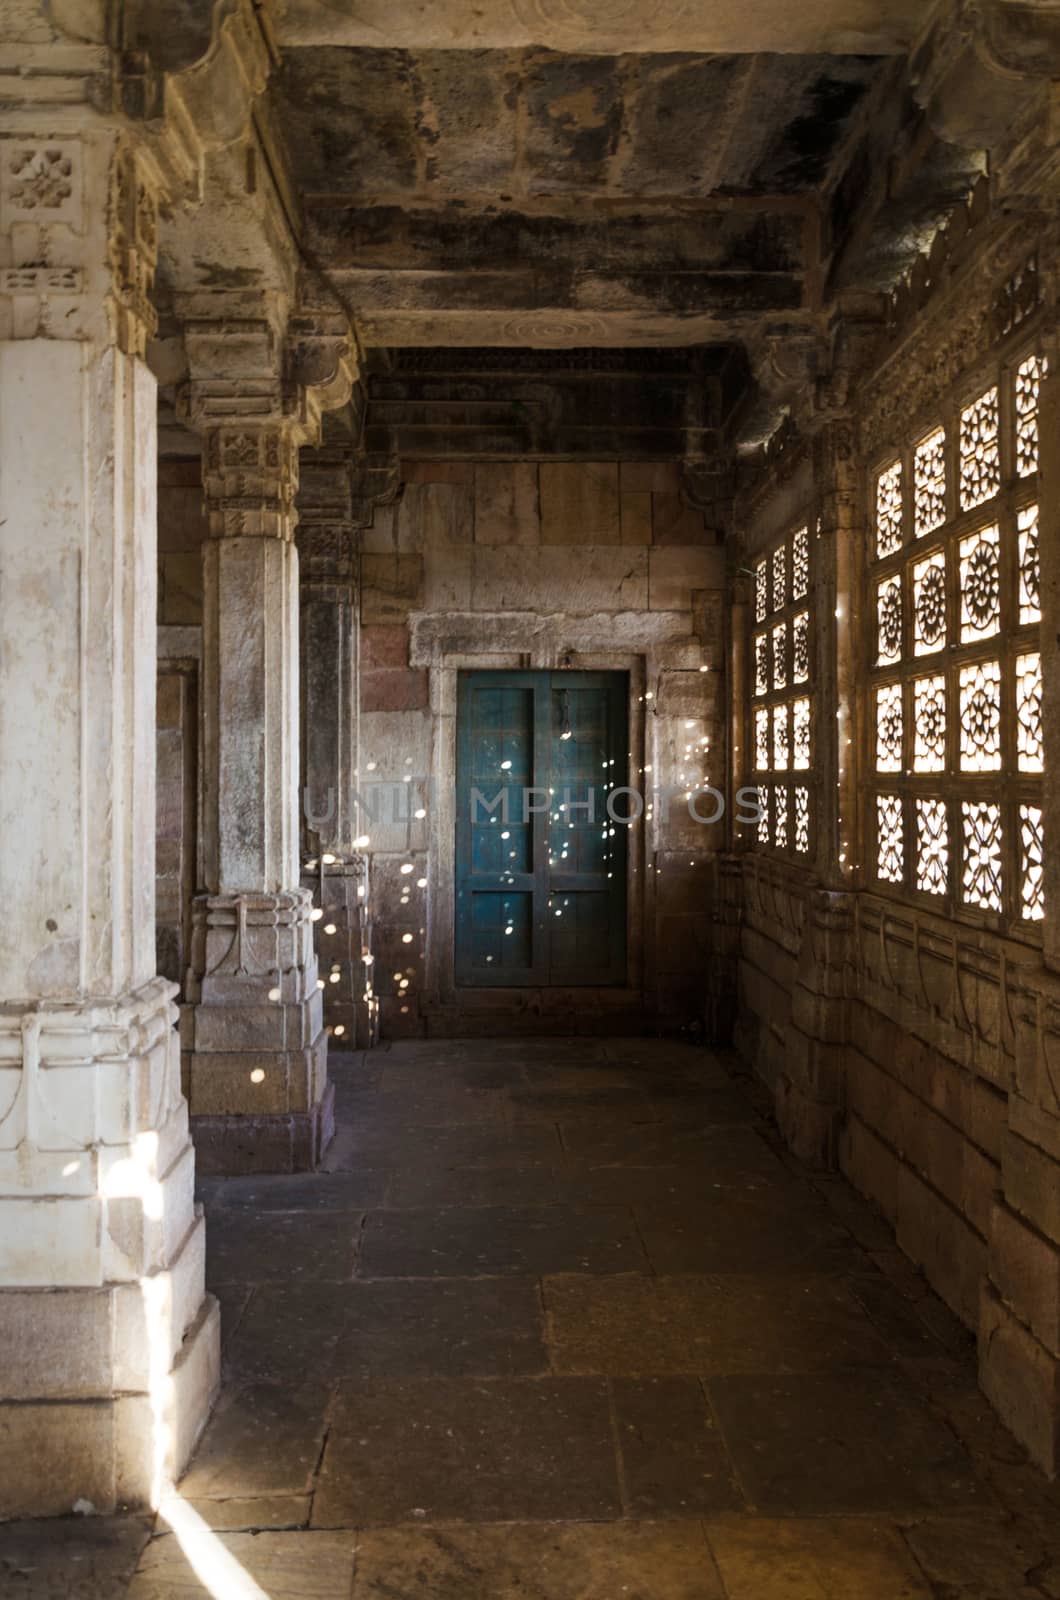 Interior of historic Tomb of Mehmud Begada, Sultan of Gujarat at Sarkhej Roza mosque in Ahmedabad, India